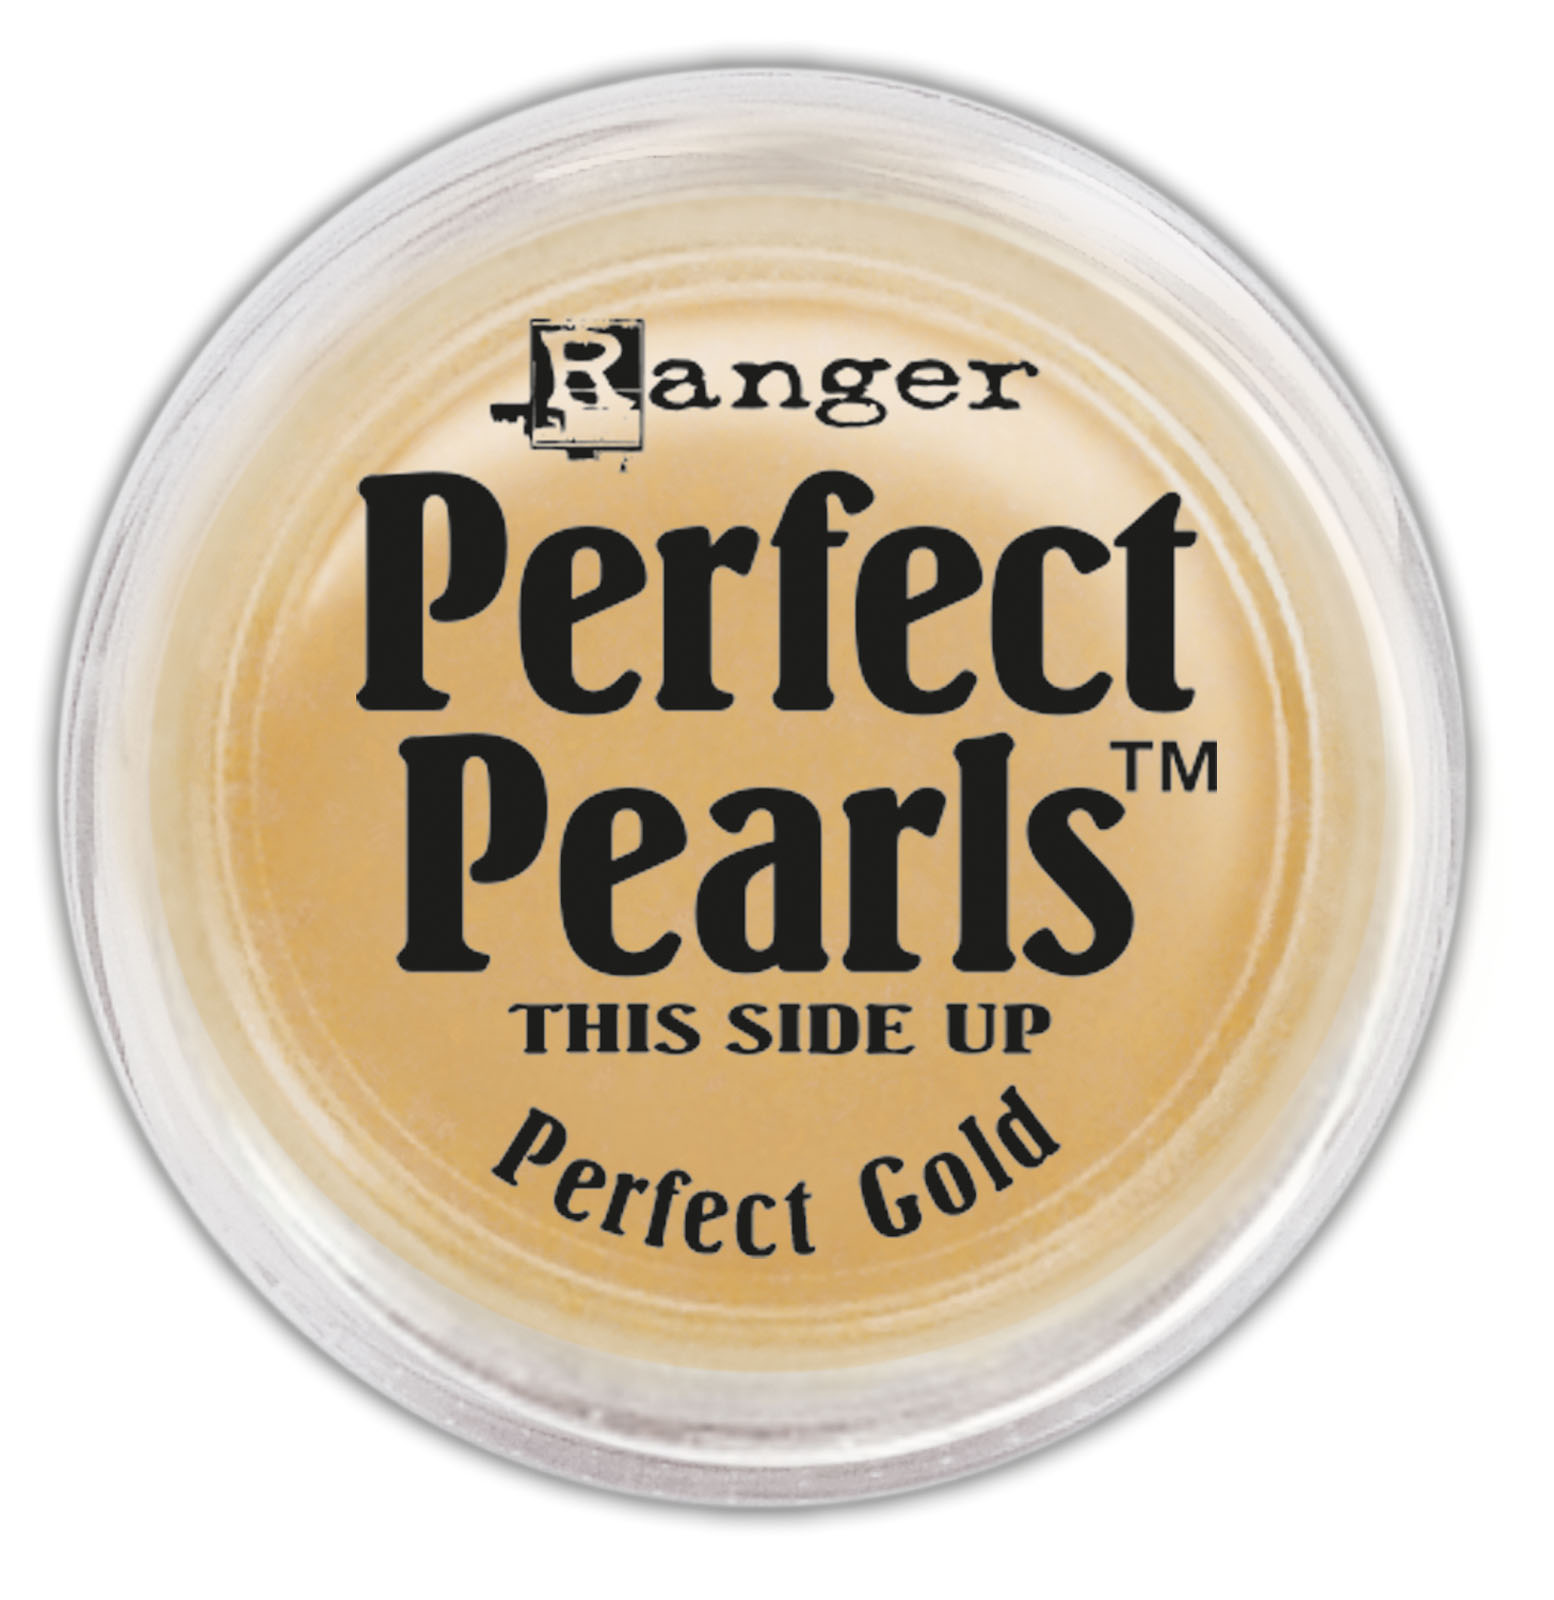 Ranger • Perfect pearls pigment powder Perfect gold